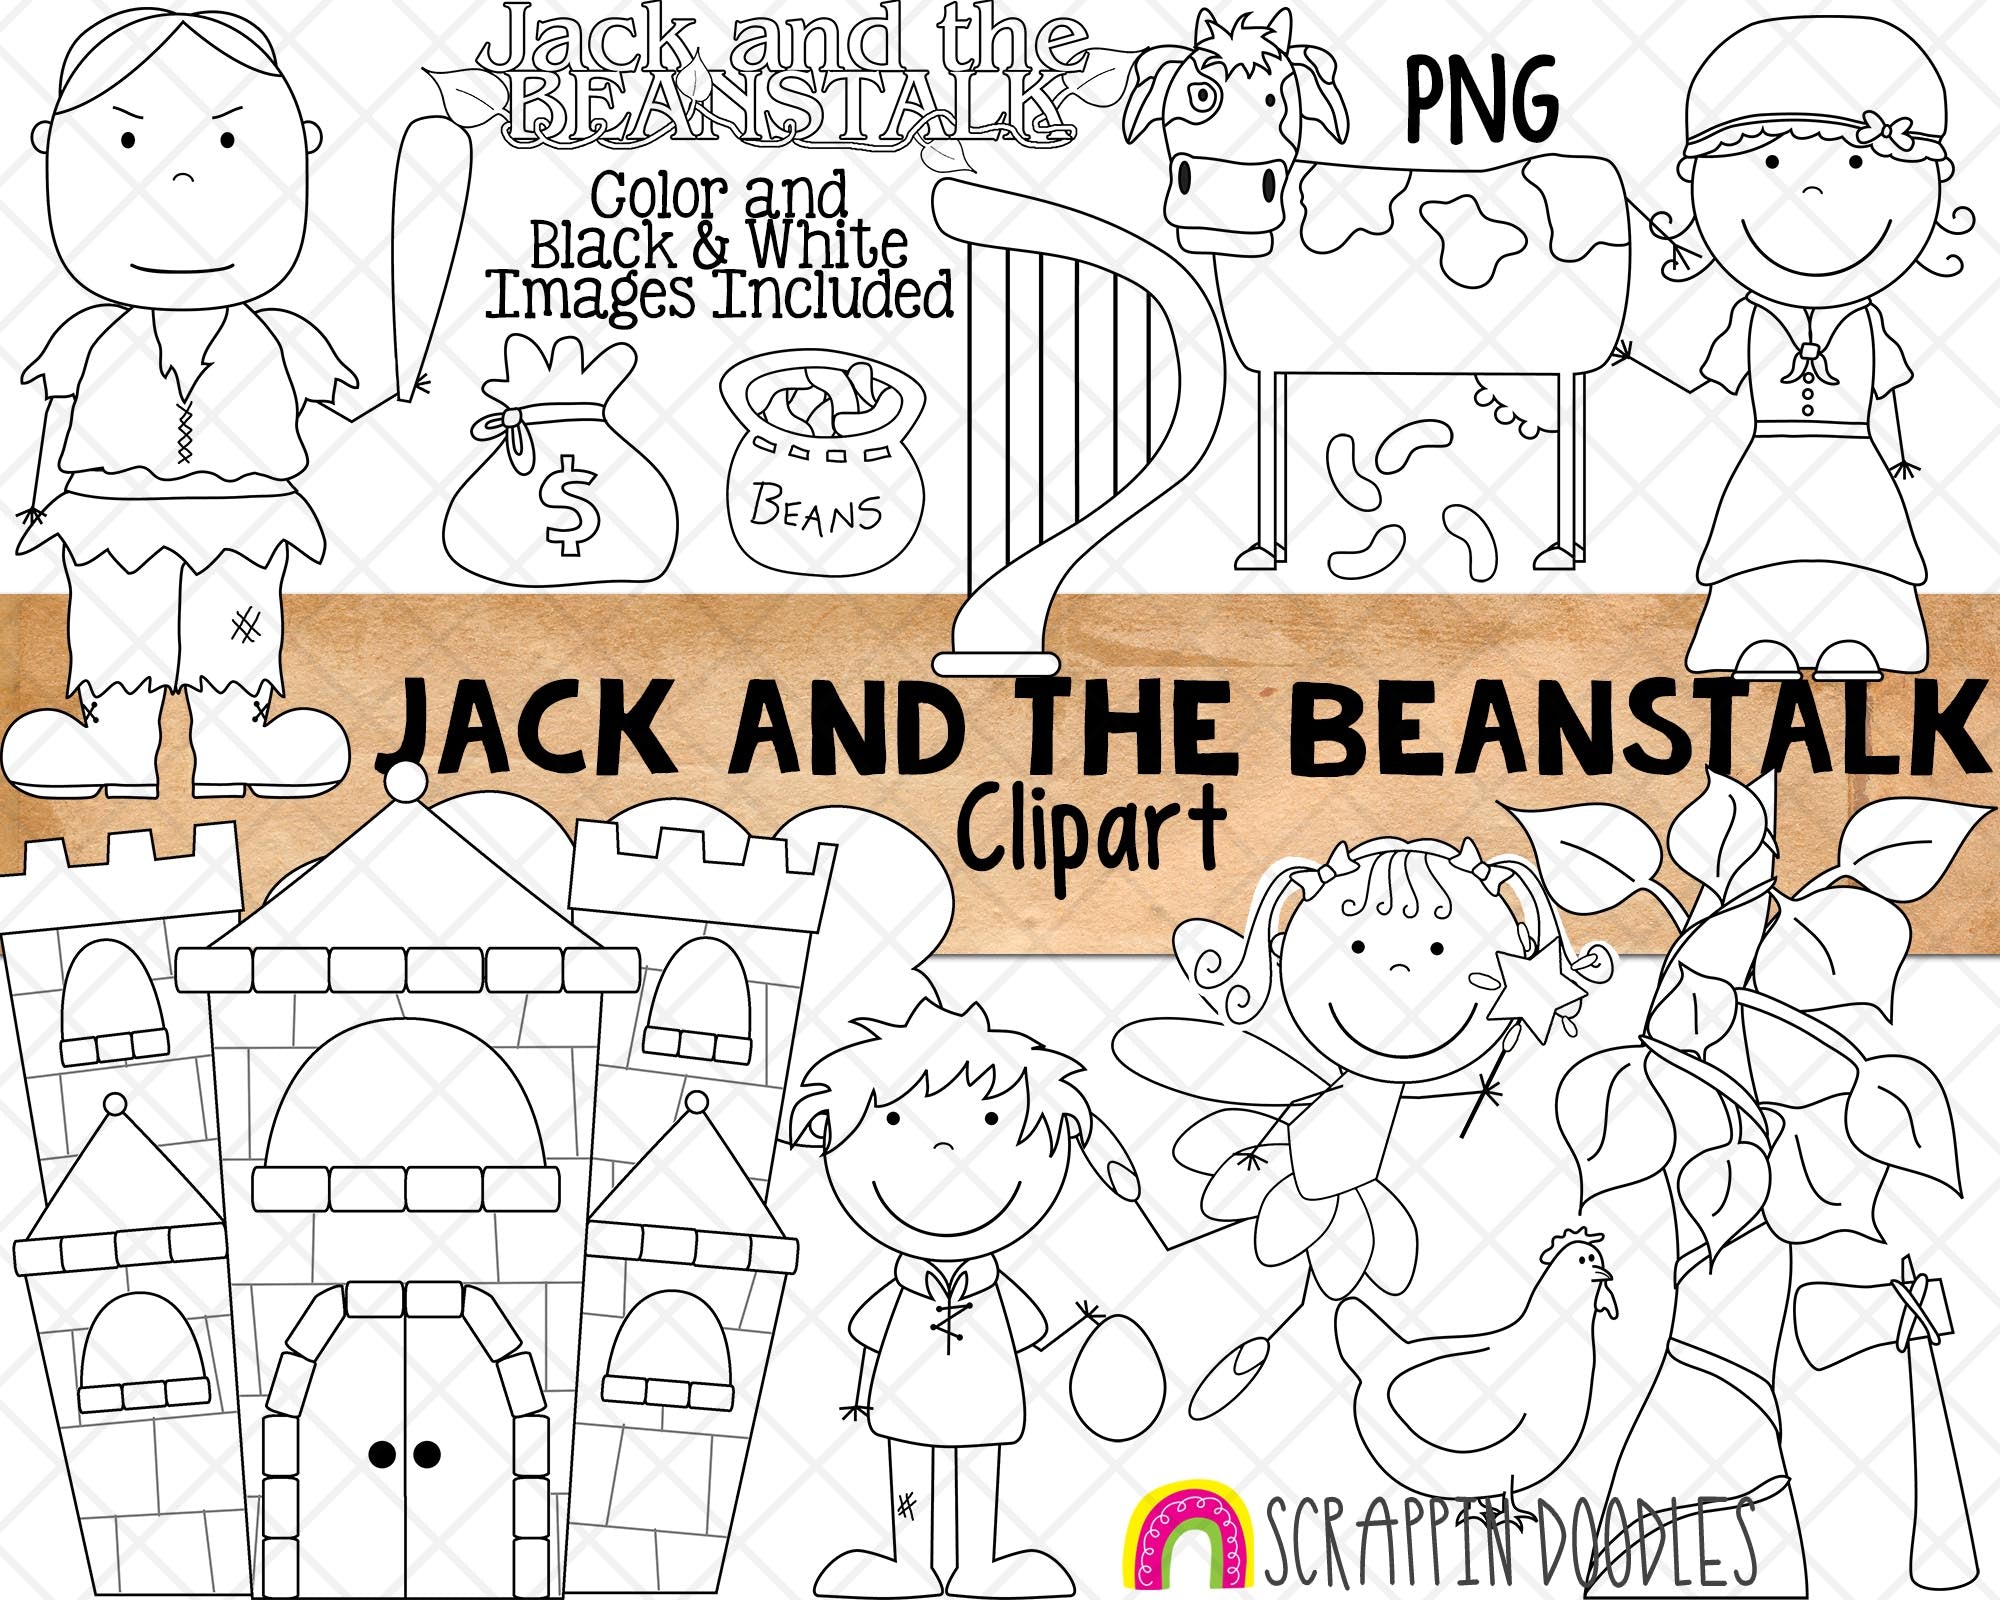 Jack and the Beanstalk ClipArt - Nursery Rhyme - Fairy Tale Graphics –  Scrappin Doodles